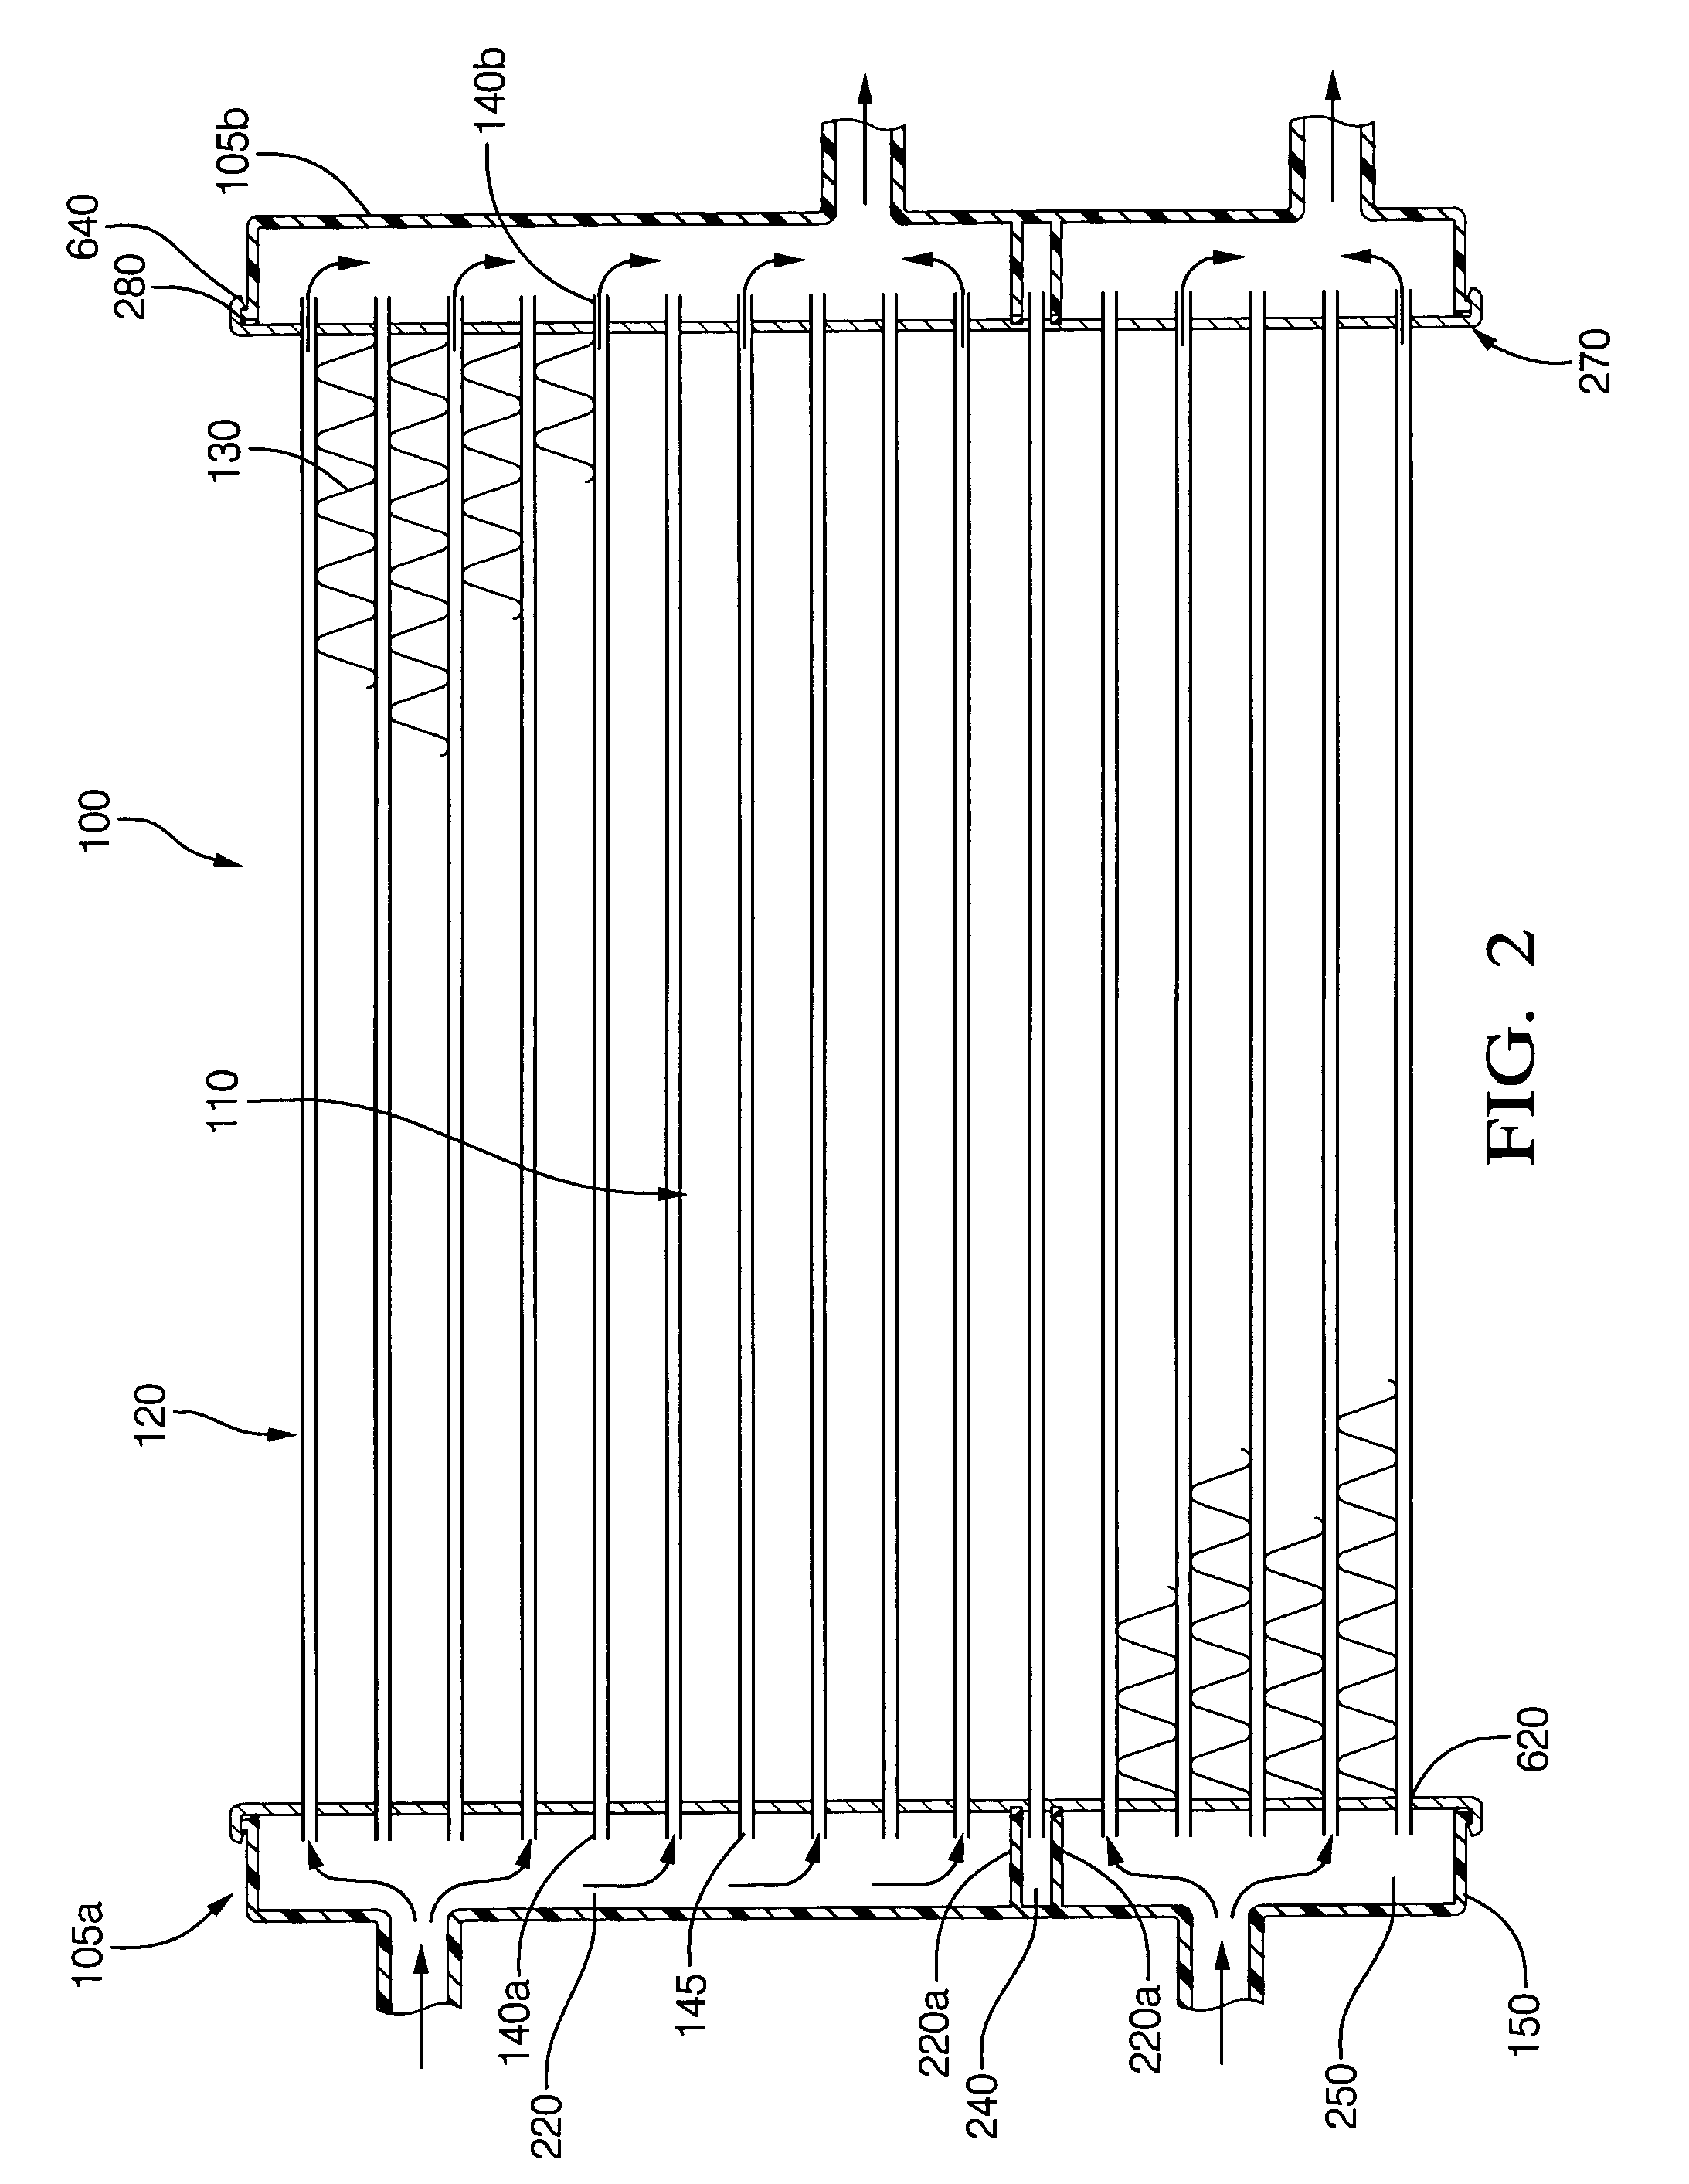 Combination heat exchanger having an improved end tank assembly